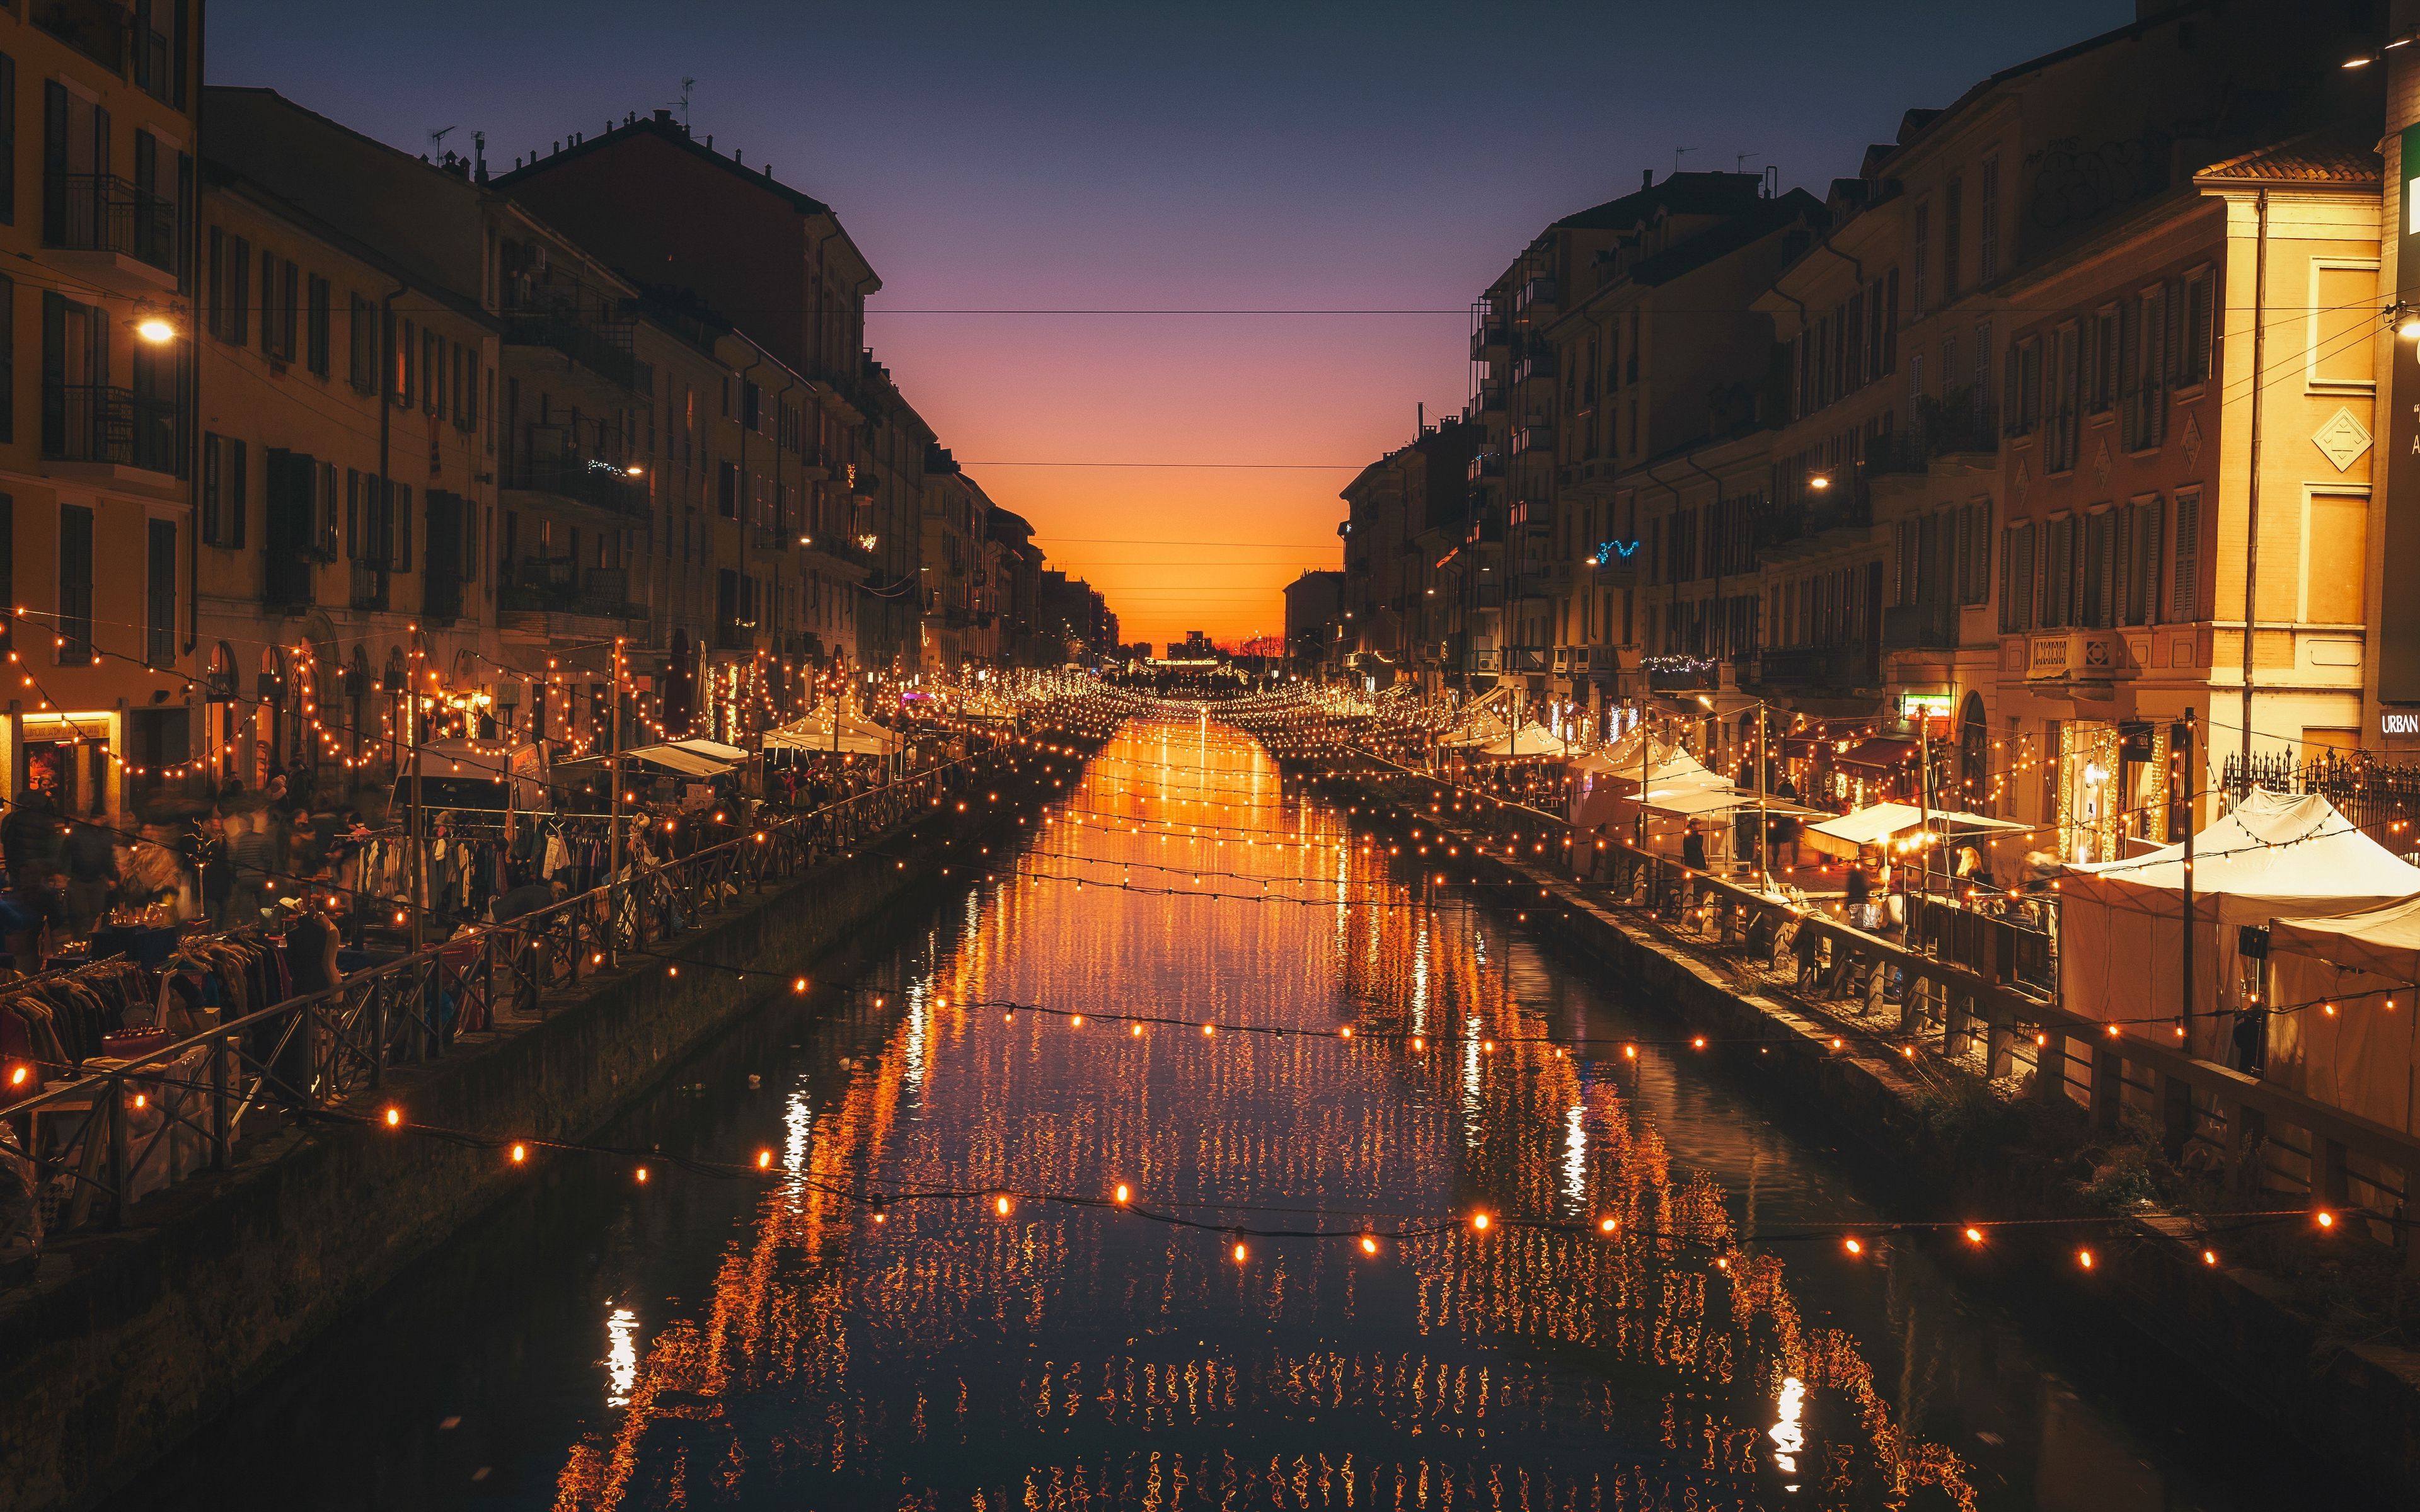 Download wallpaper 3840x2400 milan, italy, river, evening, city 4k ultra HD 16:10 HD background